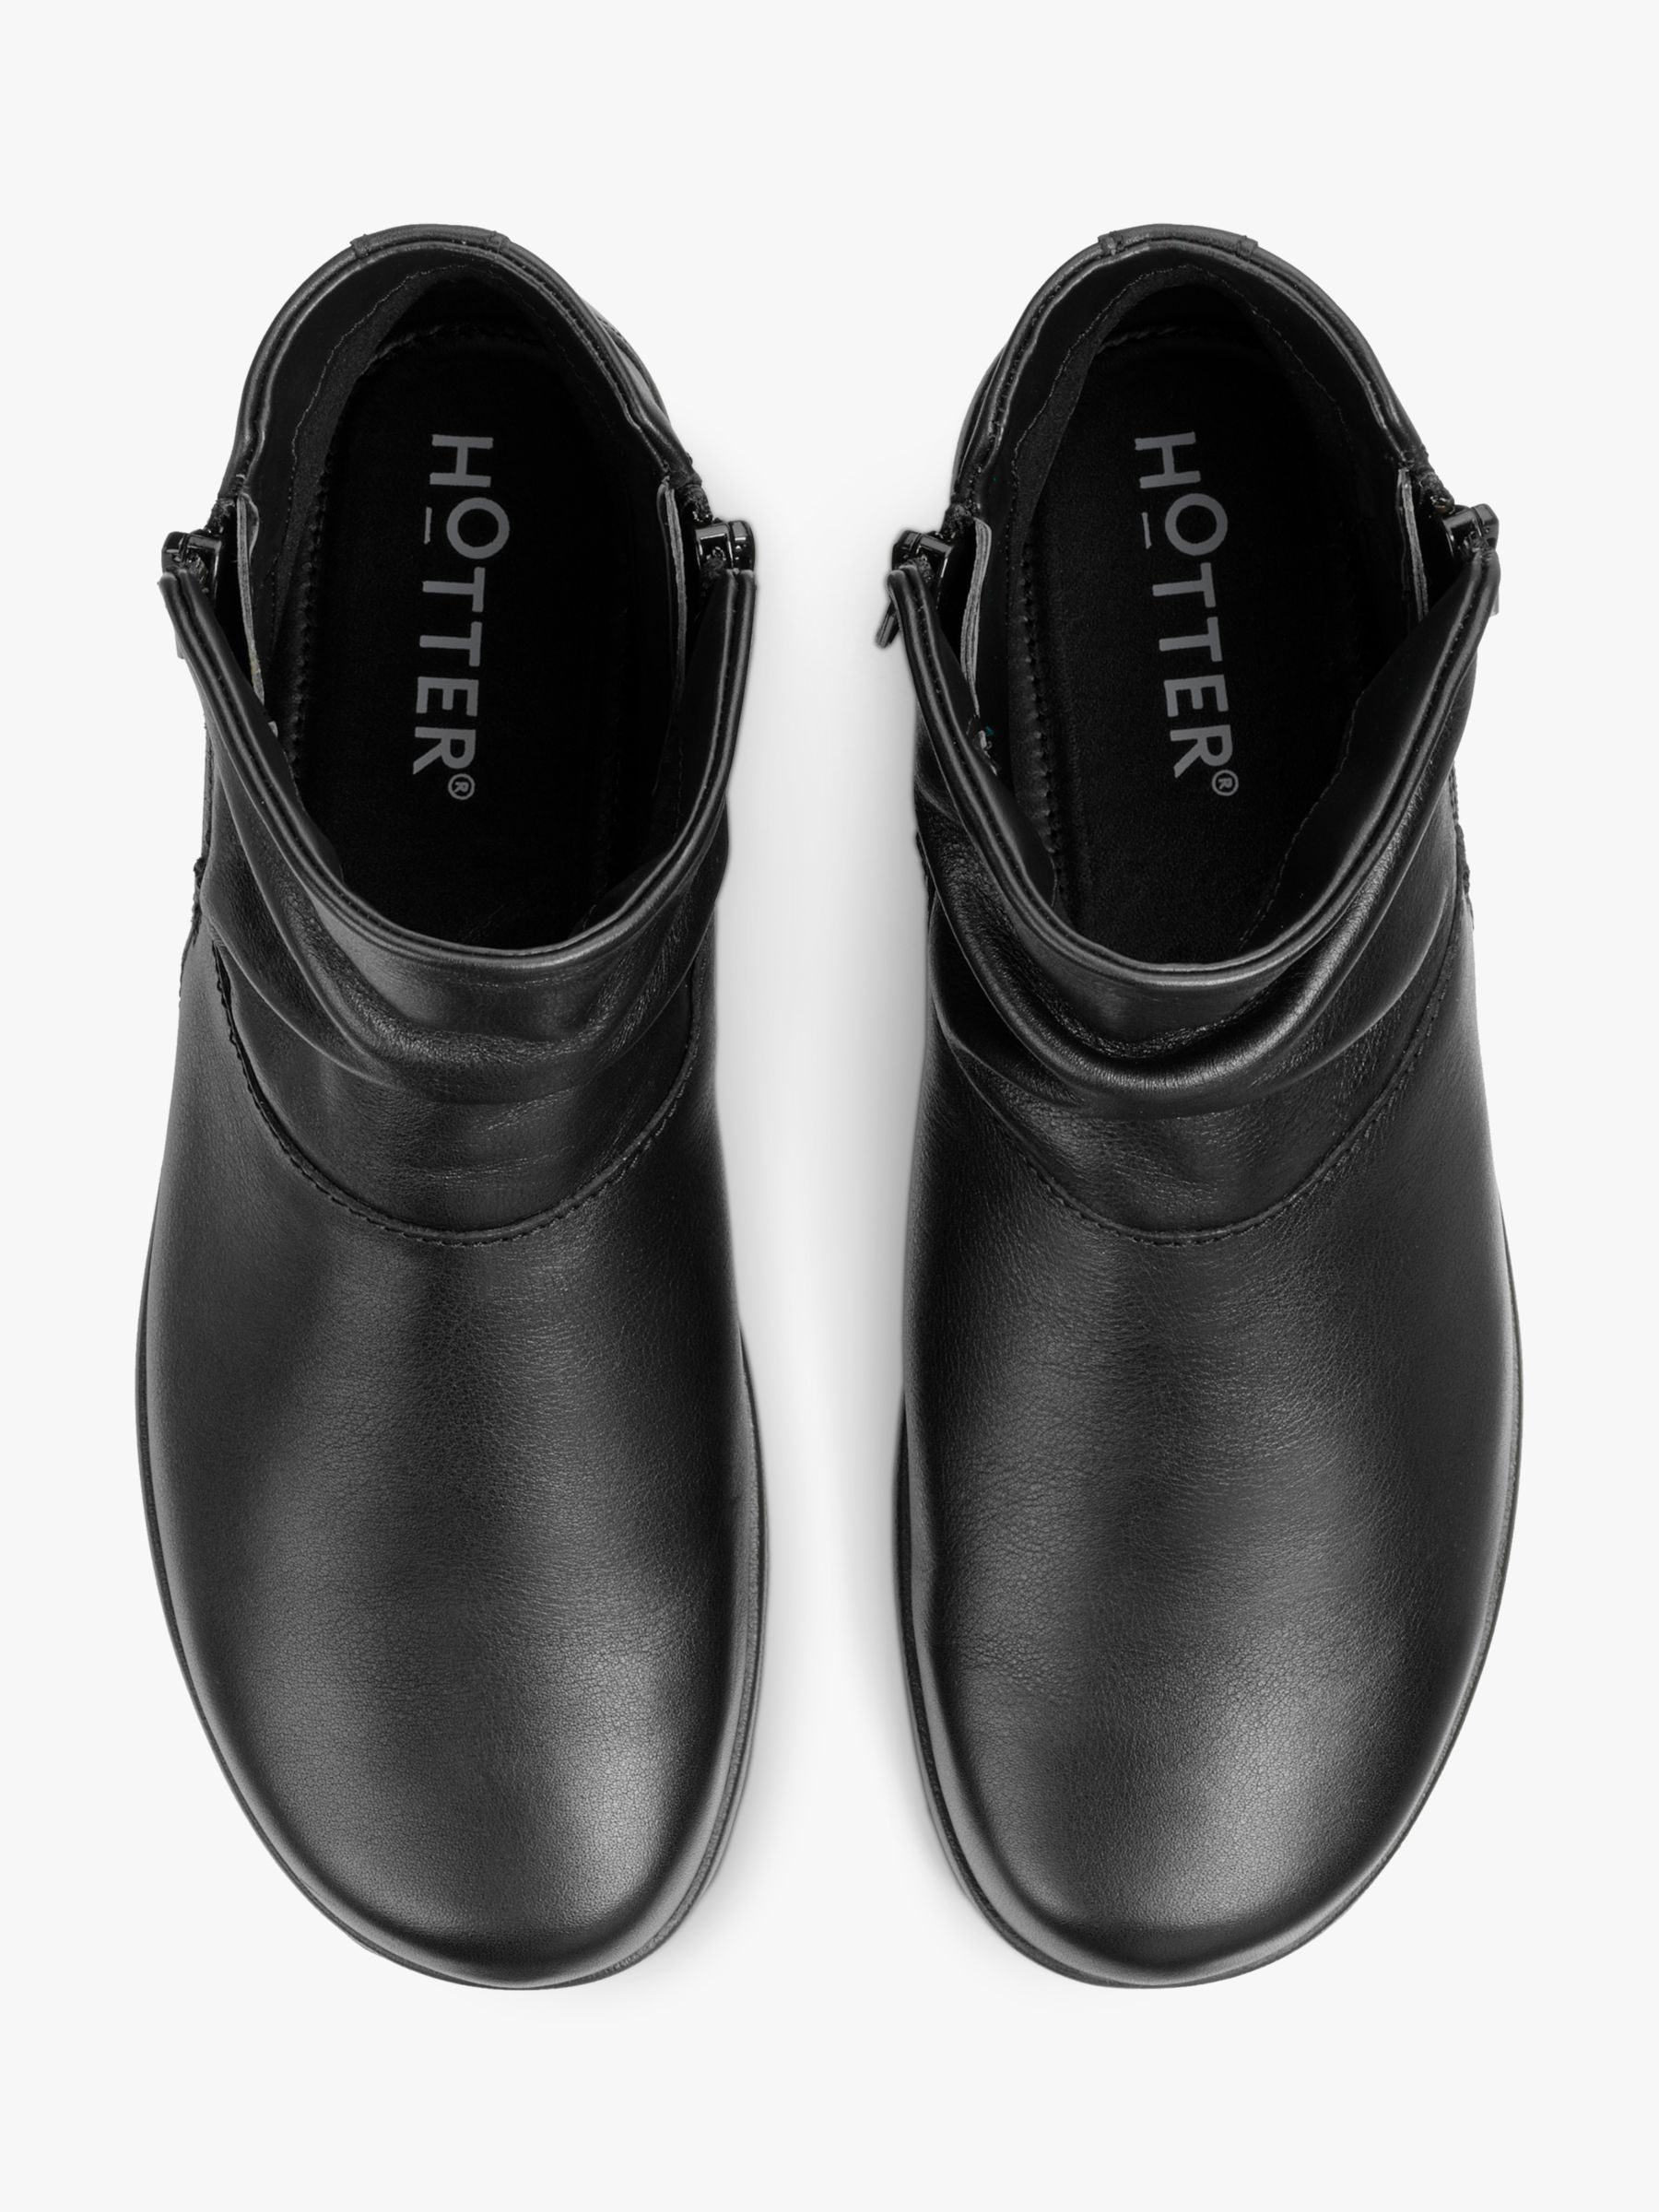 Buy Hotter Murmur Wide Fit Leather Ankle Boots, Black Online at johnlewis.com